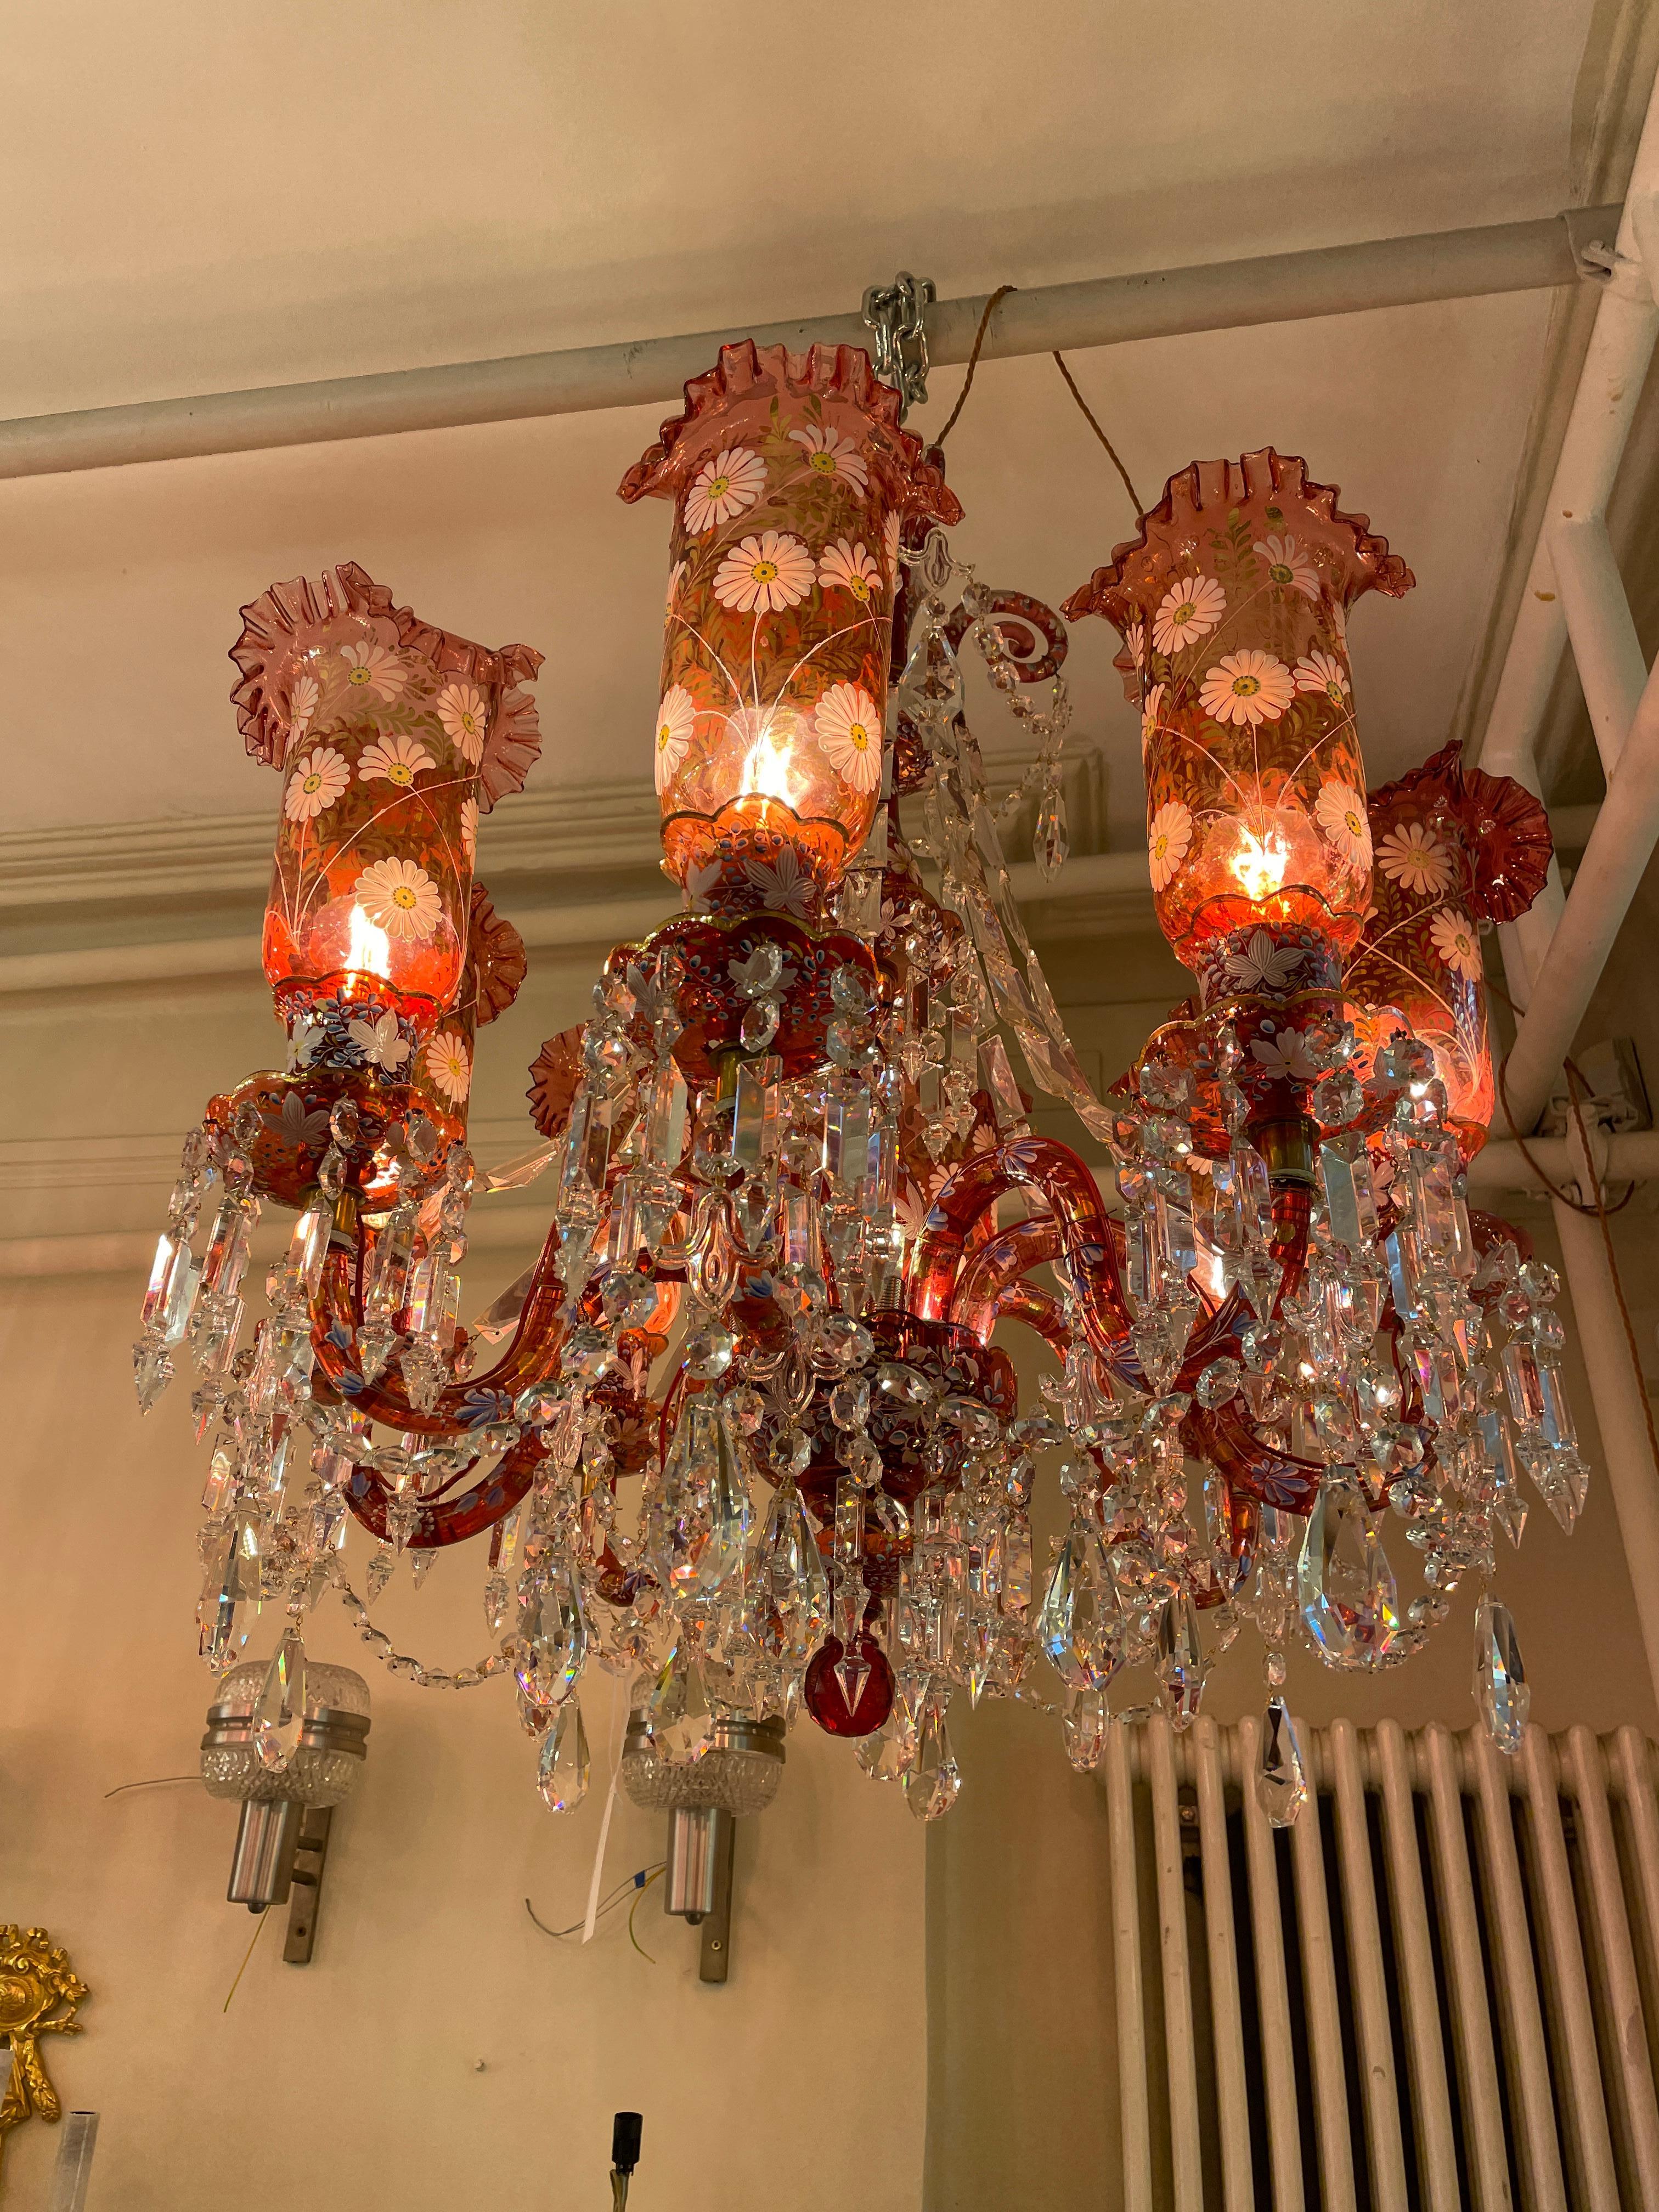 Antique Baccarat Ruby red and clear crystal 8 -light chandelier attributed to Baccarat with original hurricane shades. All decorated in an exquisite floral motif. my instagram dimitristefanov1
& 3 wall lights 

